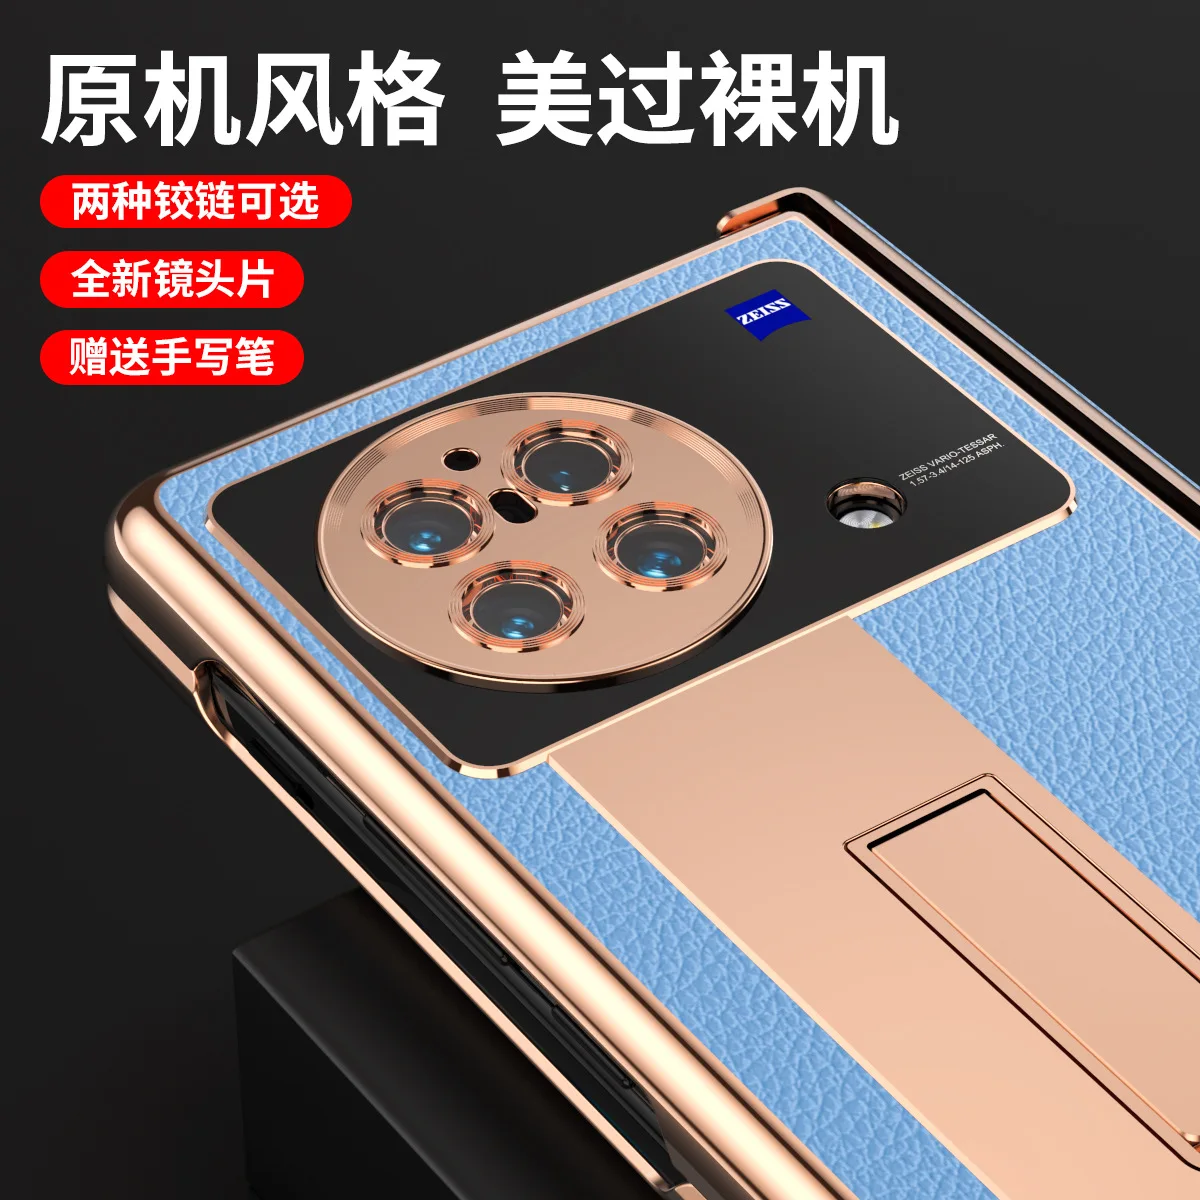 

for Vivo X Fold Case for Vivo Xfold Cover Vivo V2178a Case Electroplated Plain Leather Case Hinge Included a Pen For Free